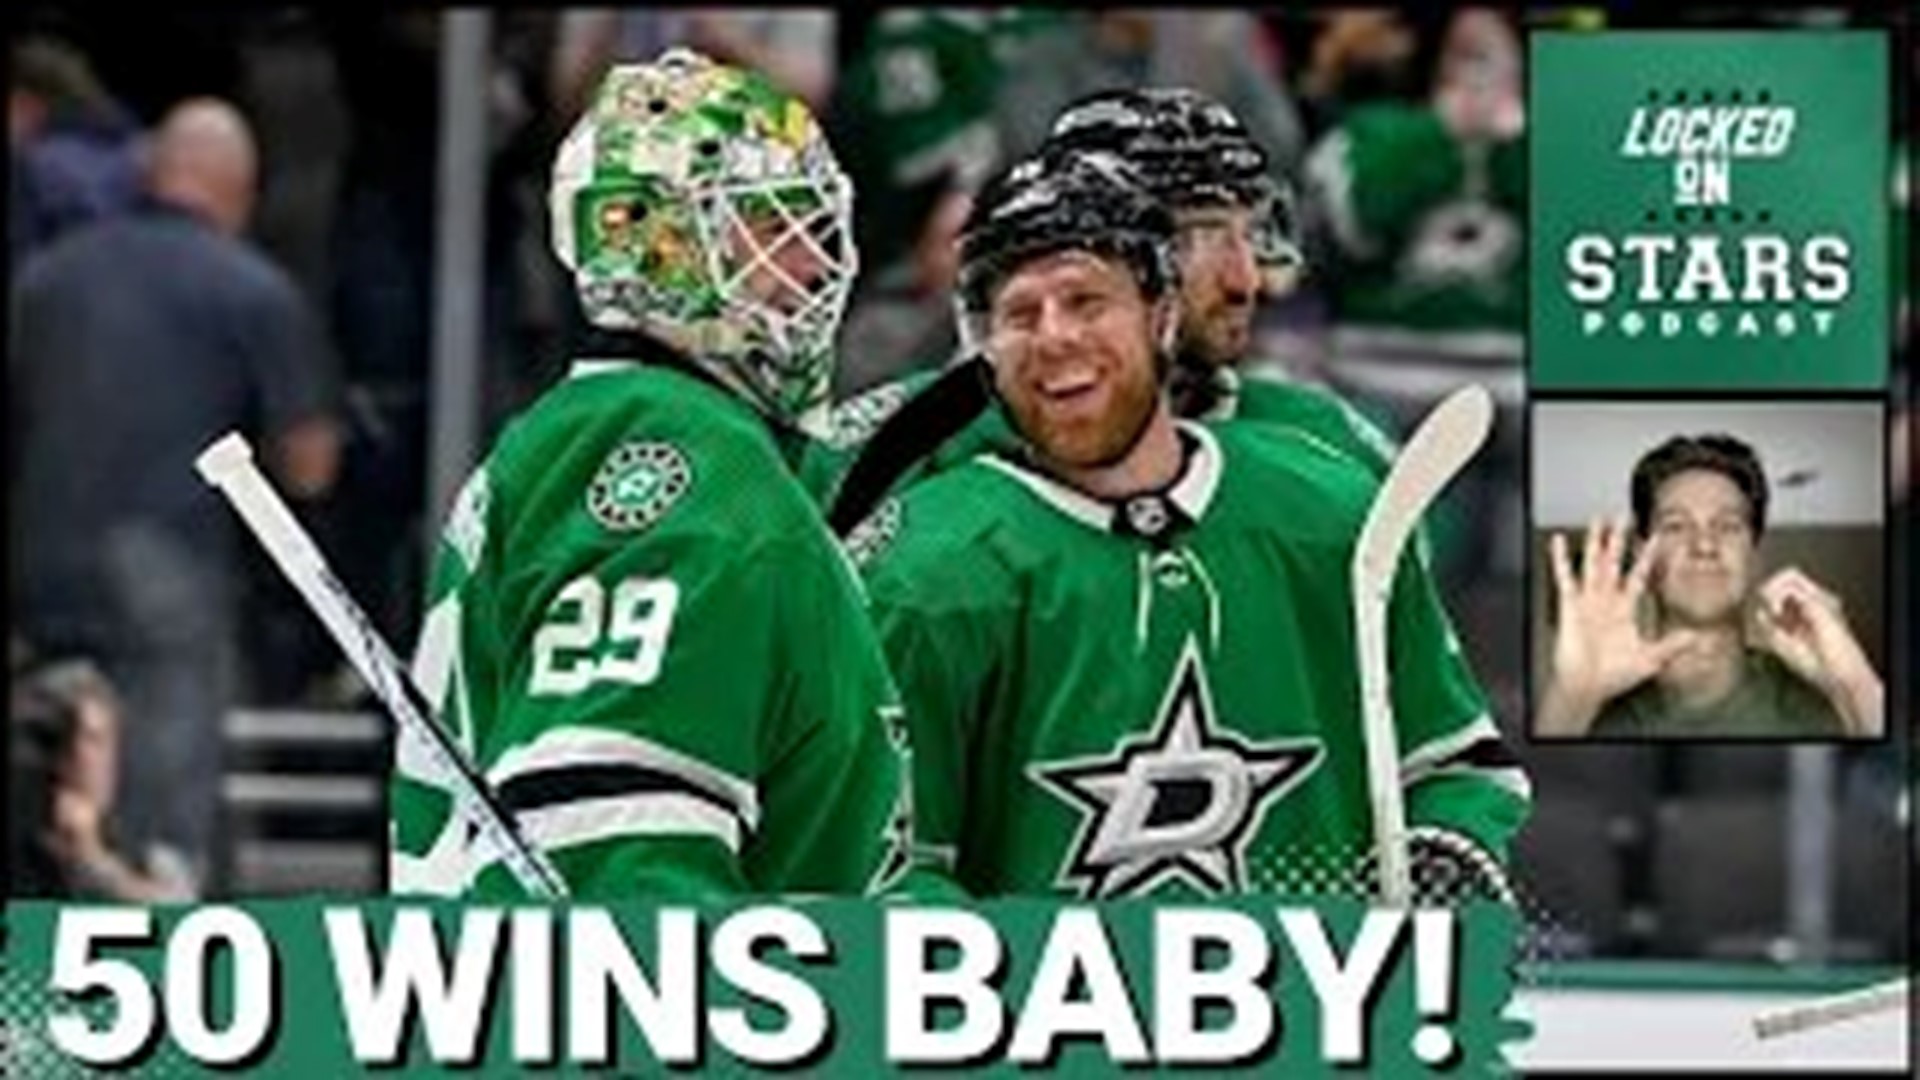 The Dallas Stars beat the Buffalo Sabres 3-2 for the 50th win of the season. It's the fifth time in Franchise History the Dallas Stars have hit the 50 win mark.